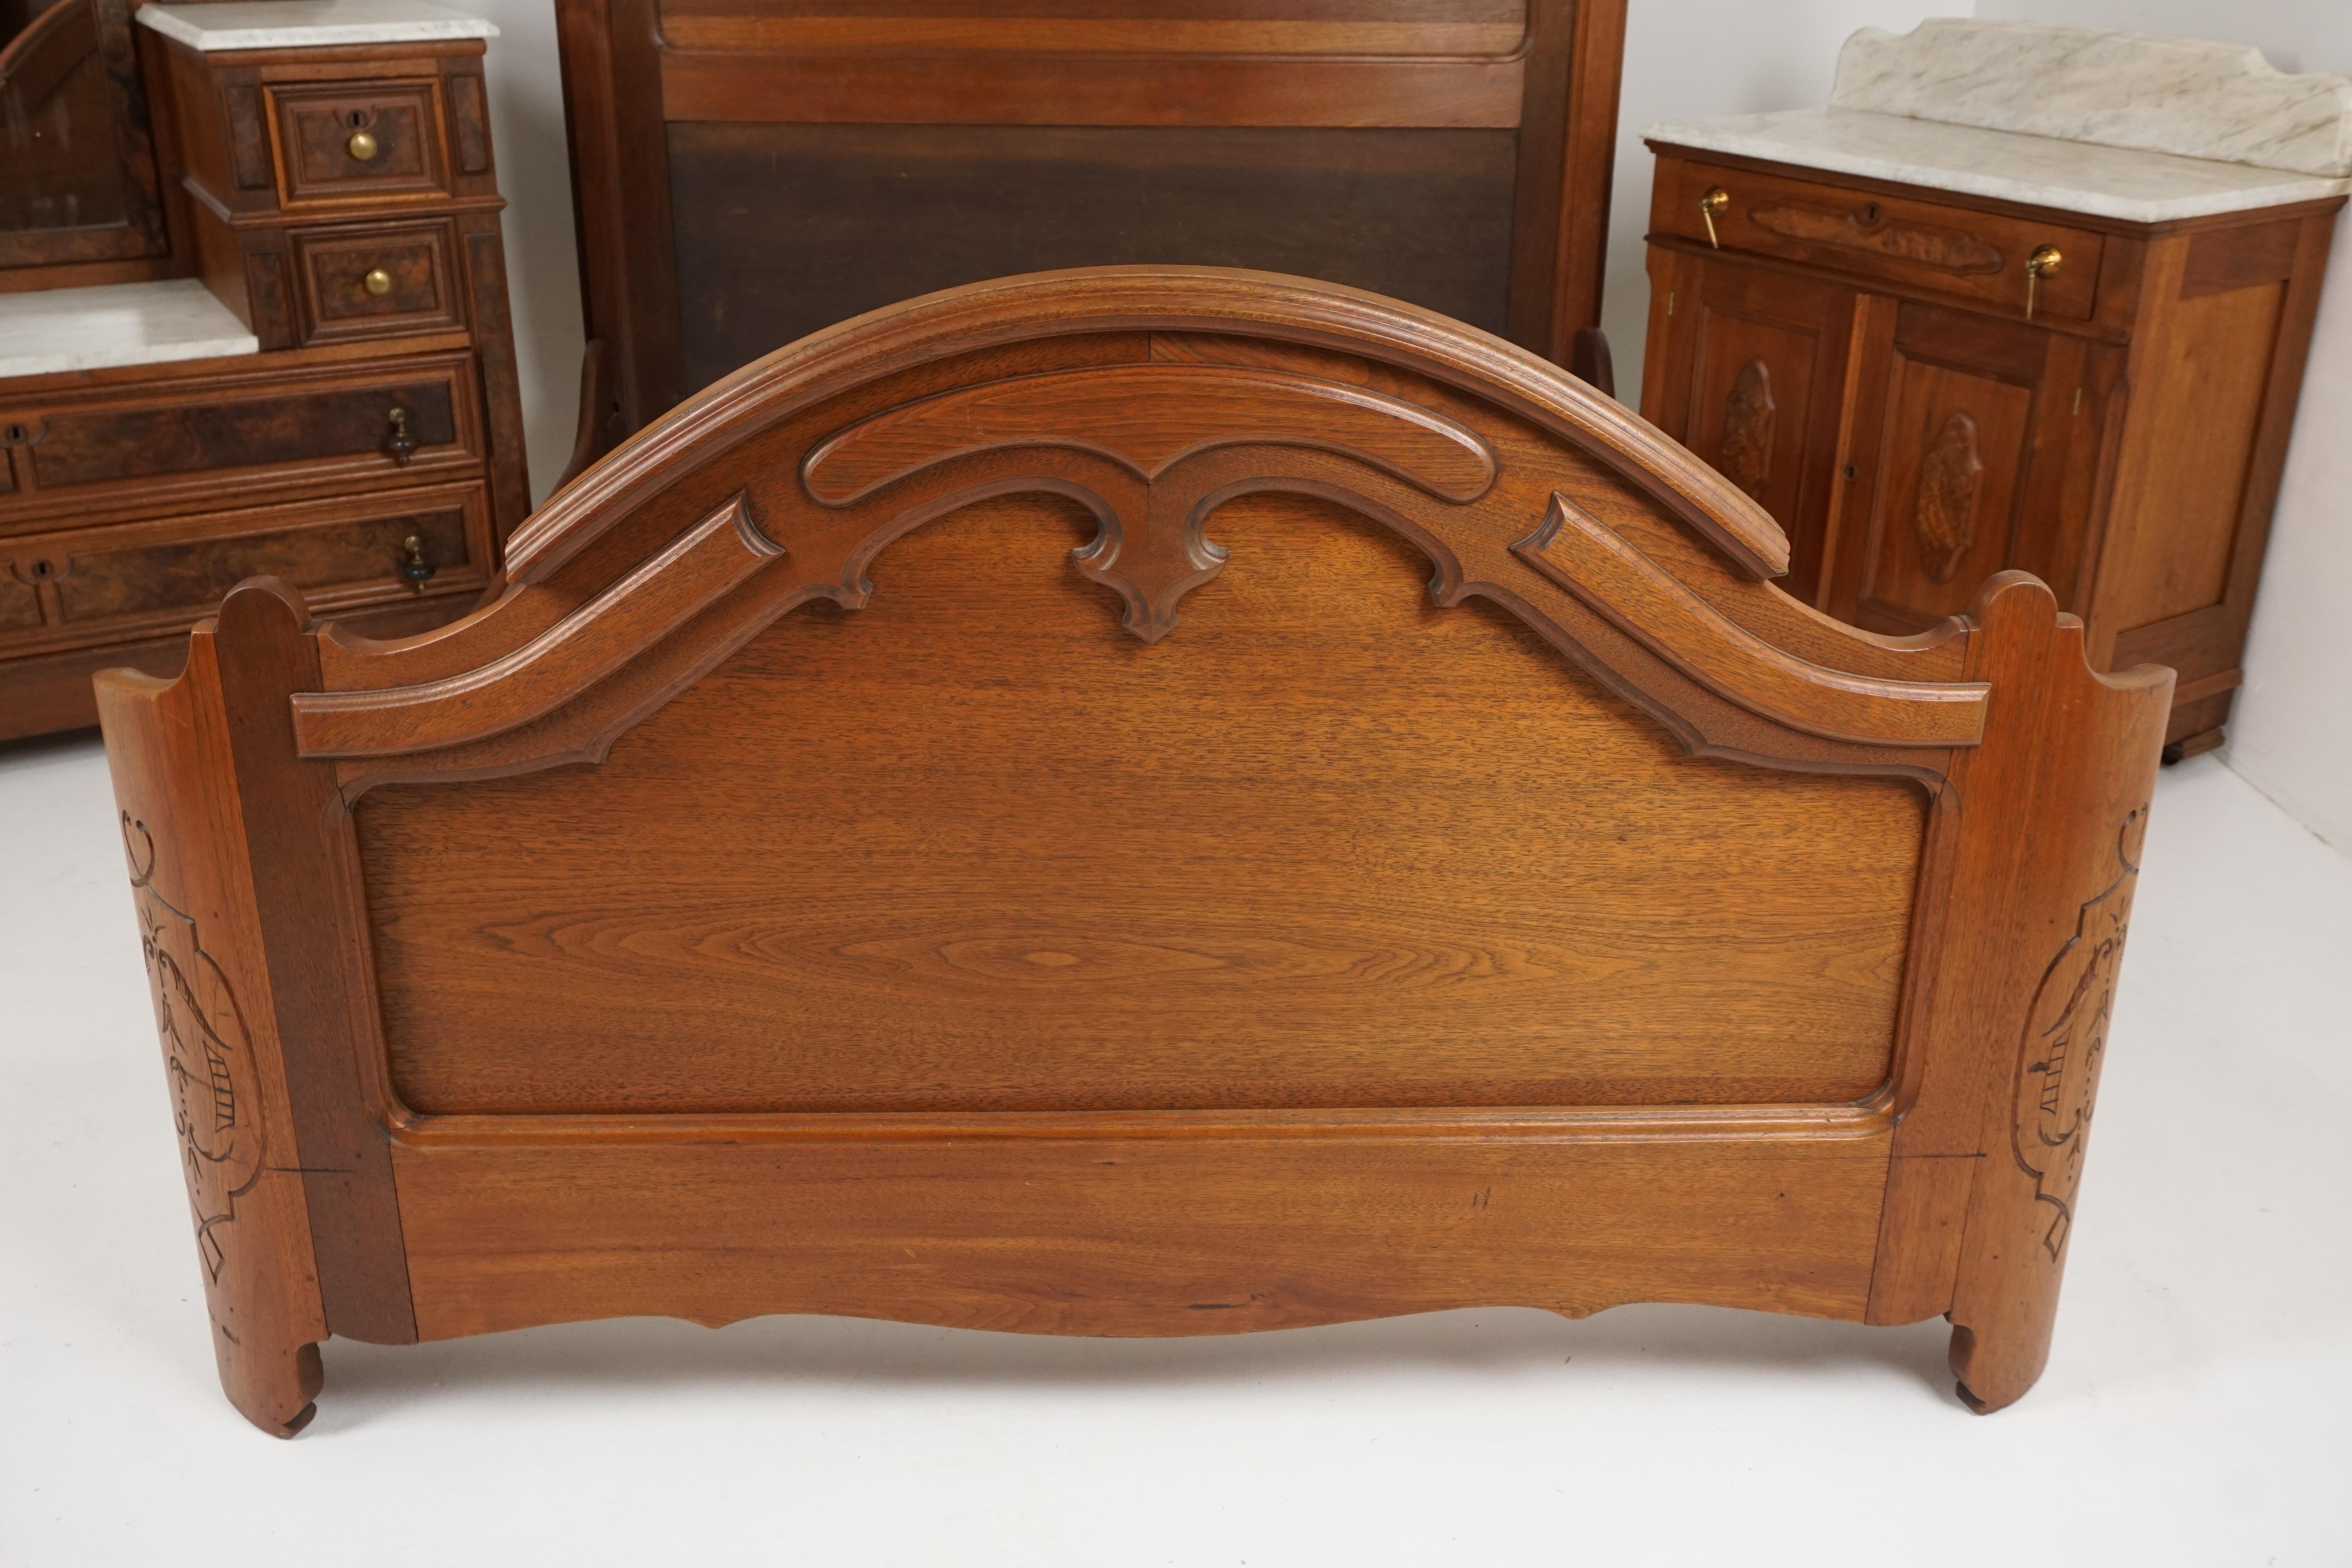 Antique Victorian bed frame, walnut double bed and rails, East Lake, American 1880, B2516

American 1880
Solid walnut
Original finish
Tall headboard with carved pediment to the top
Solid paneled back with carved inset
Foot board has a shaped